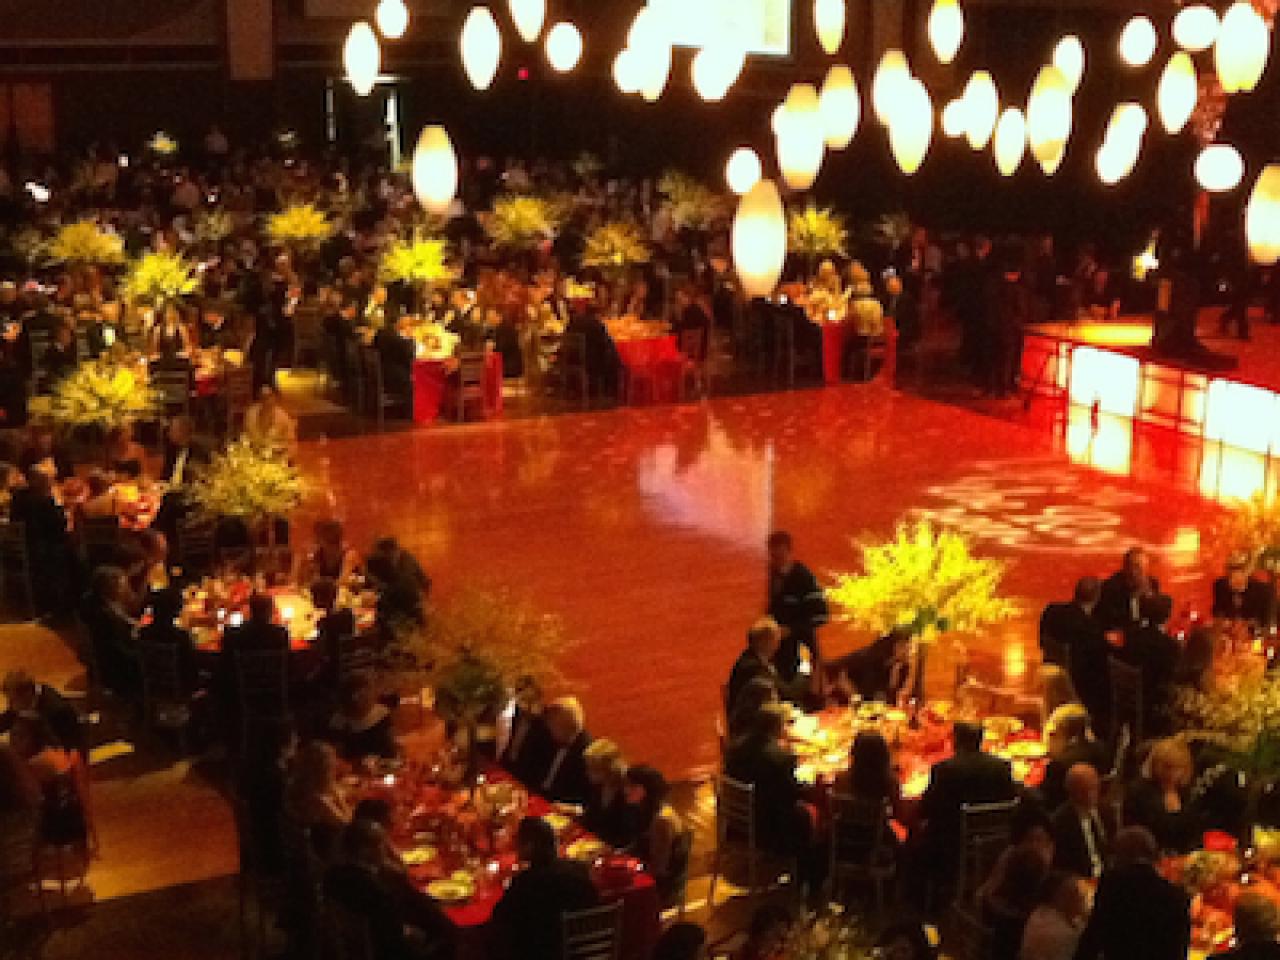 Example of a university catering venue during an event